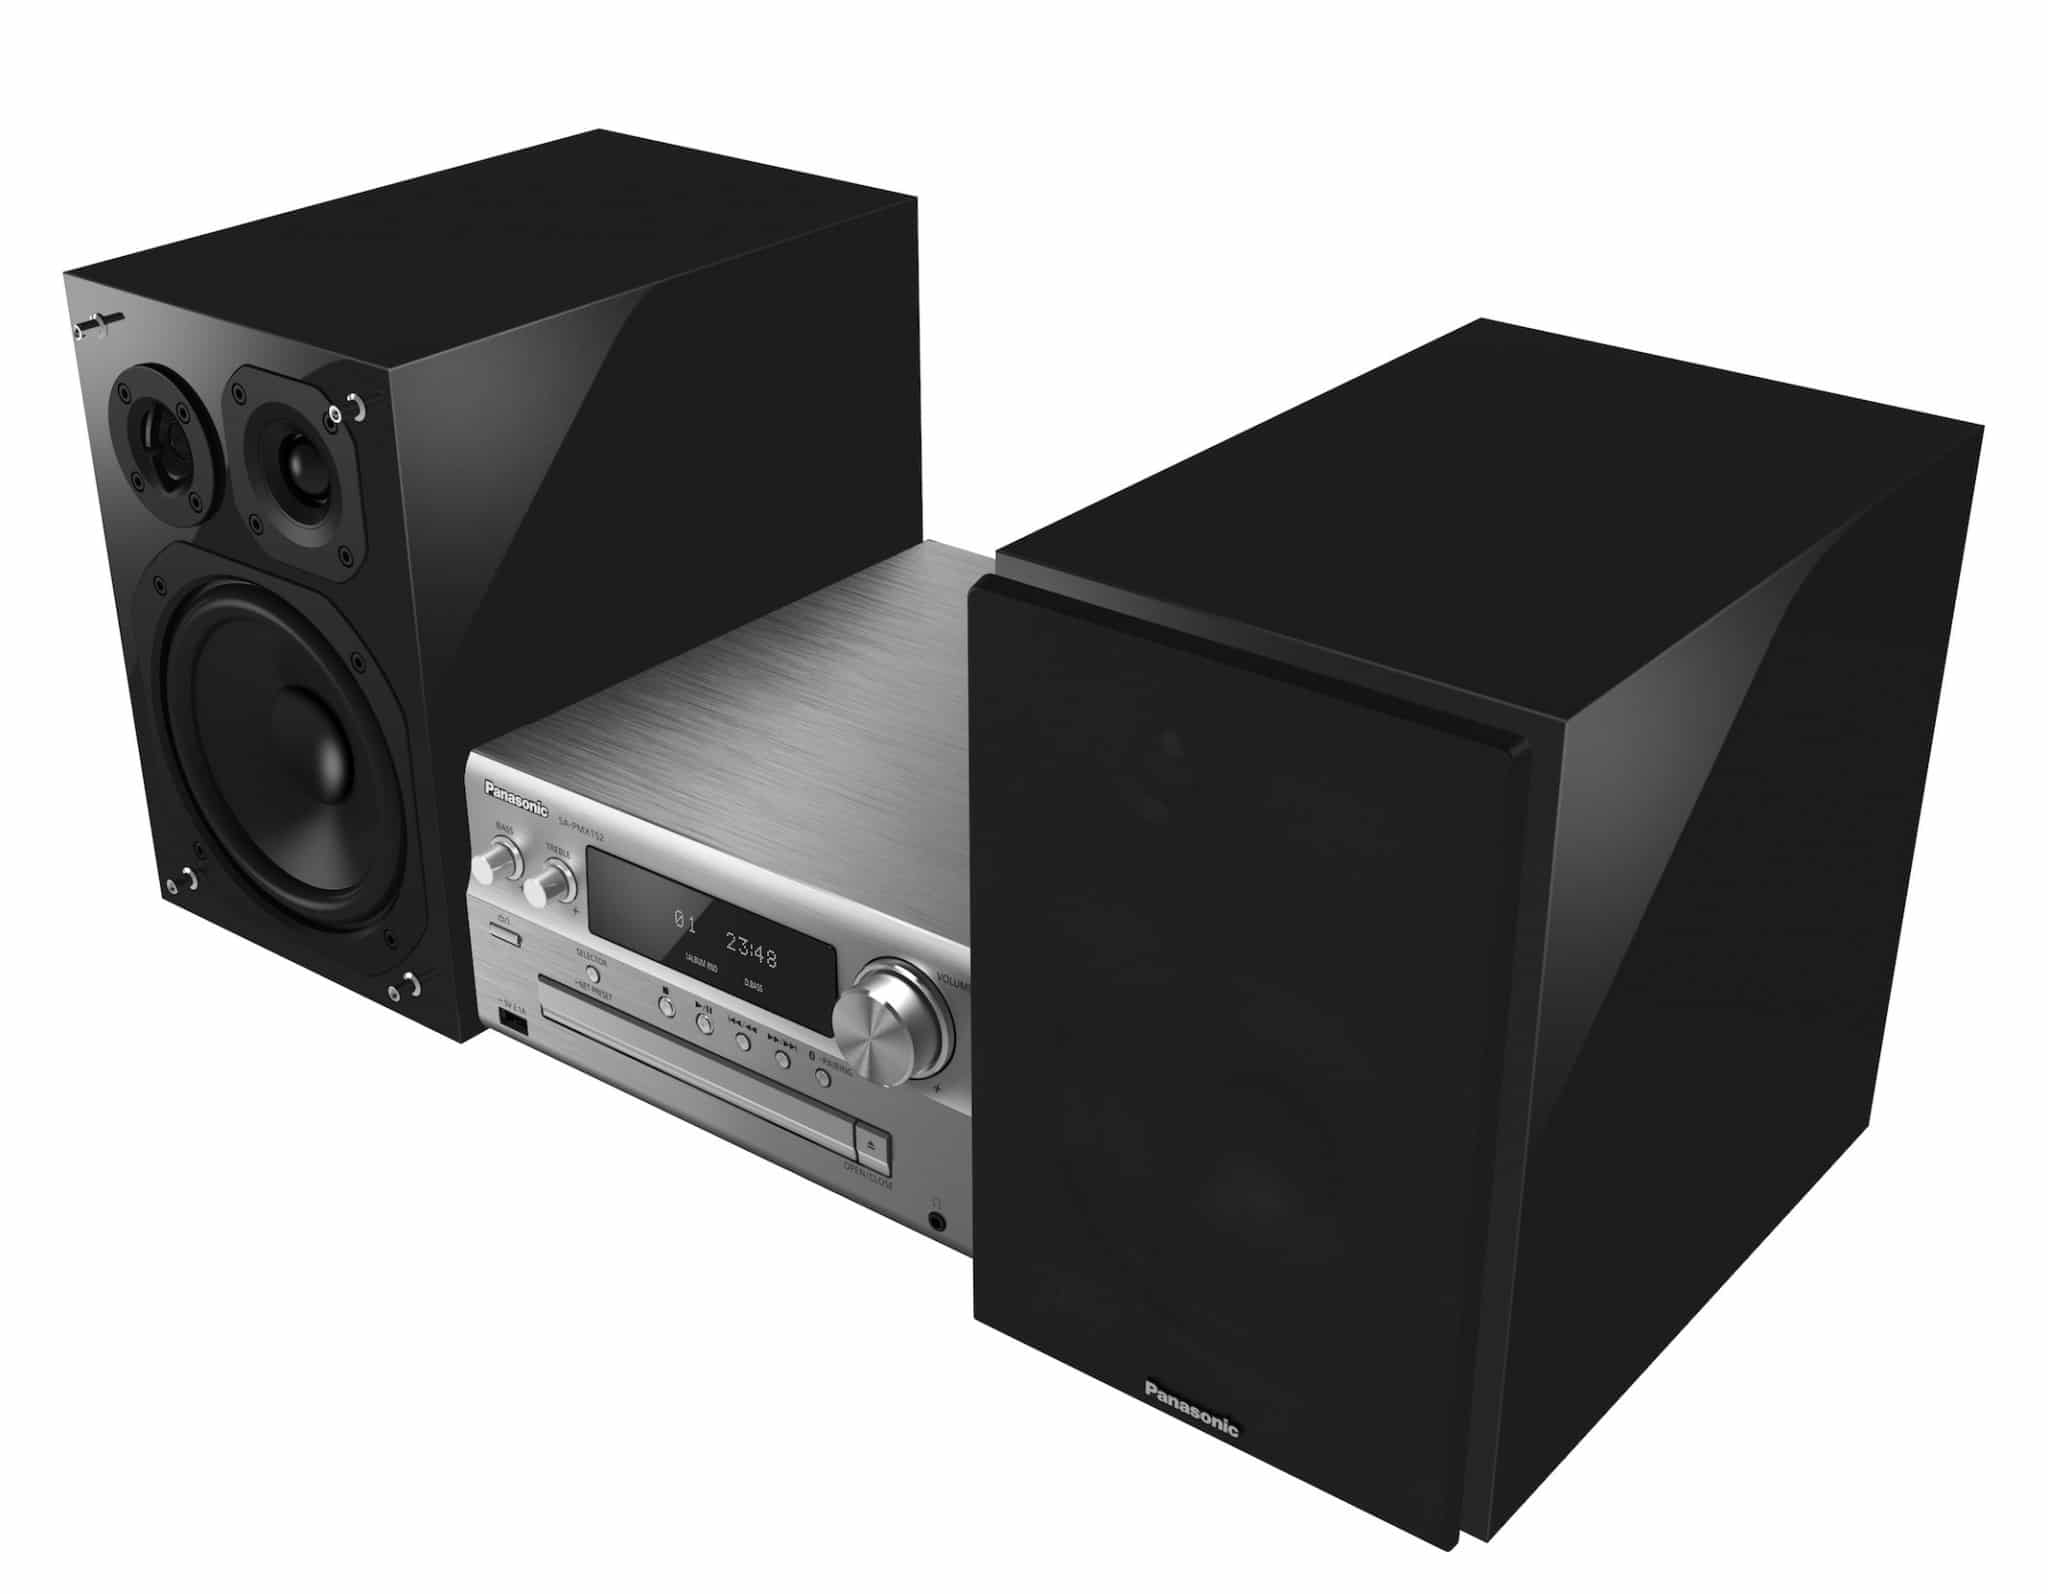 Panasonic Micro Hi-Fi systems: the SC-PMX152 and SC-PMX82 - The